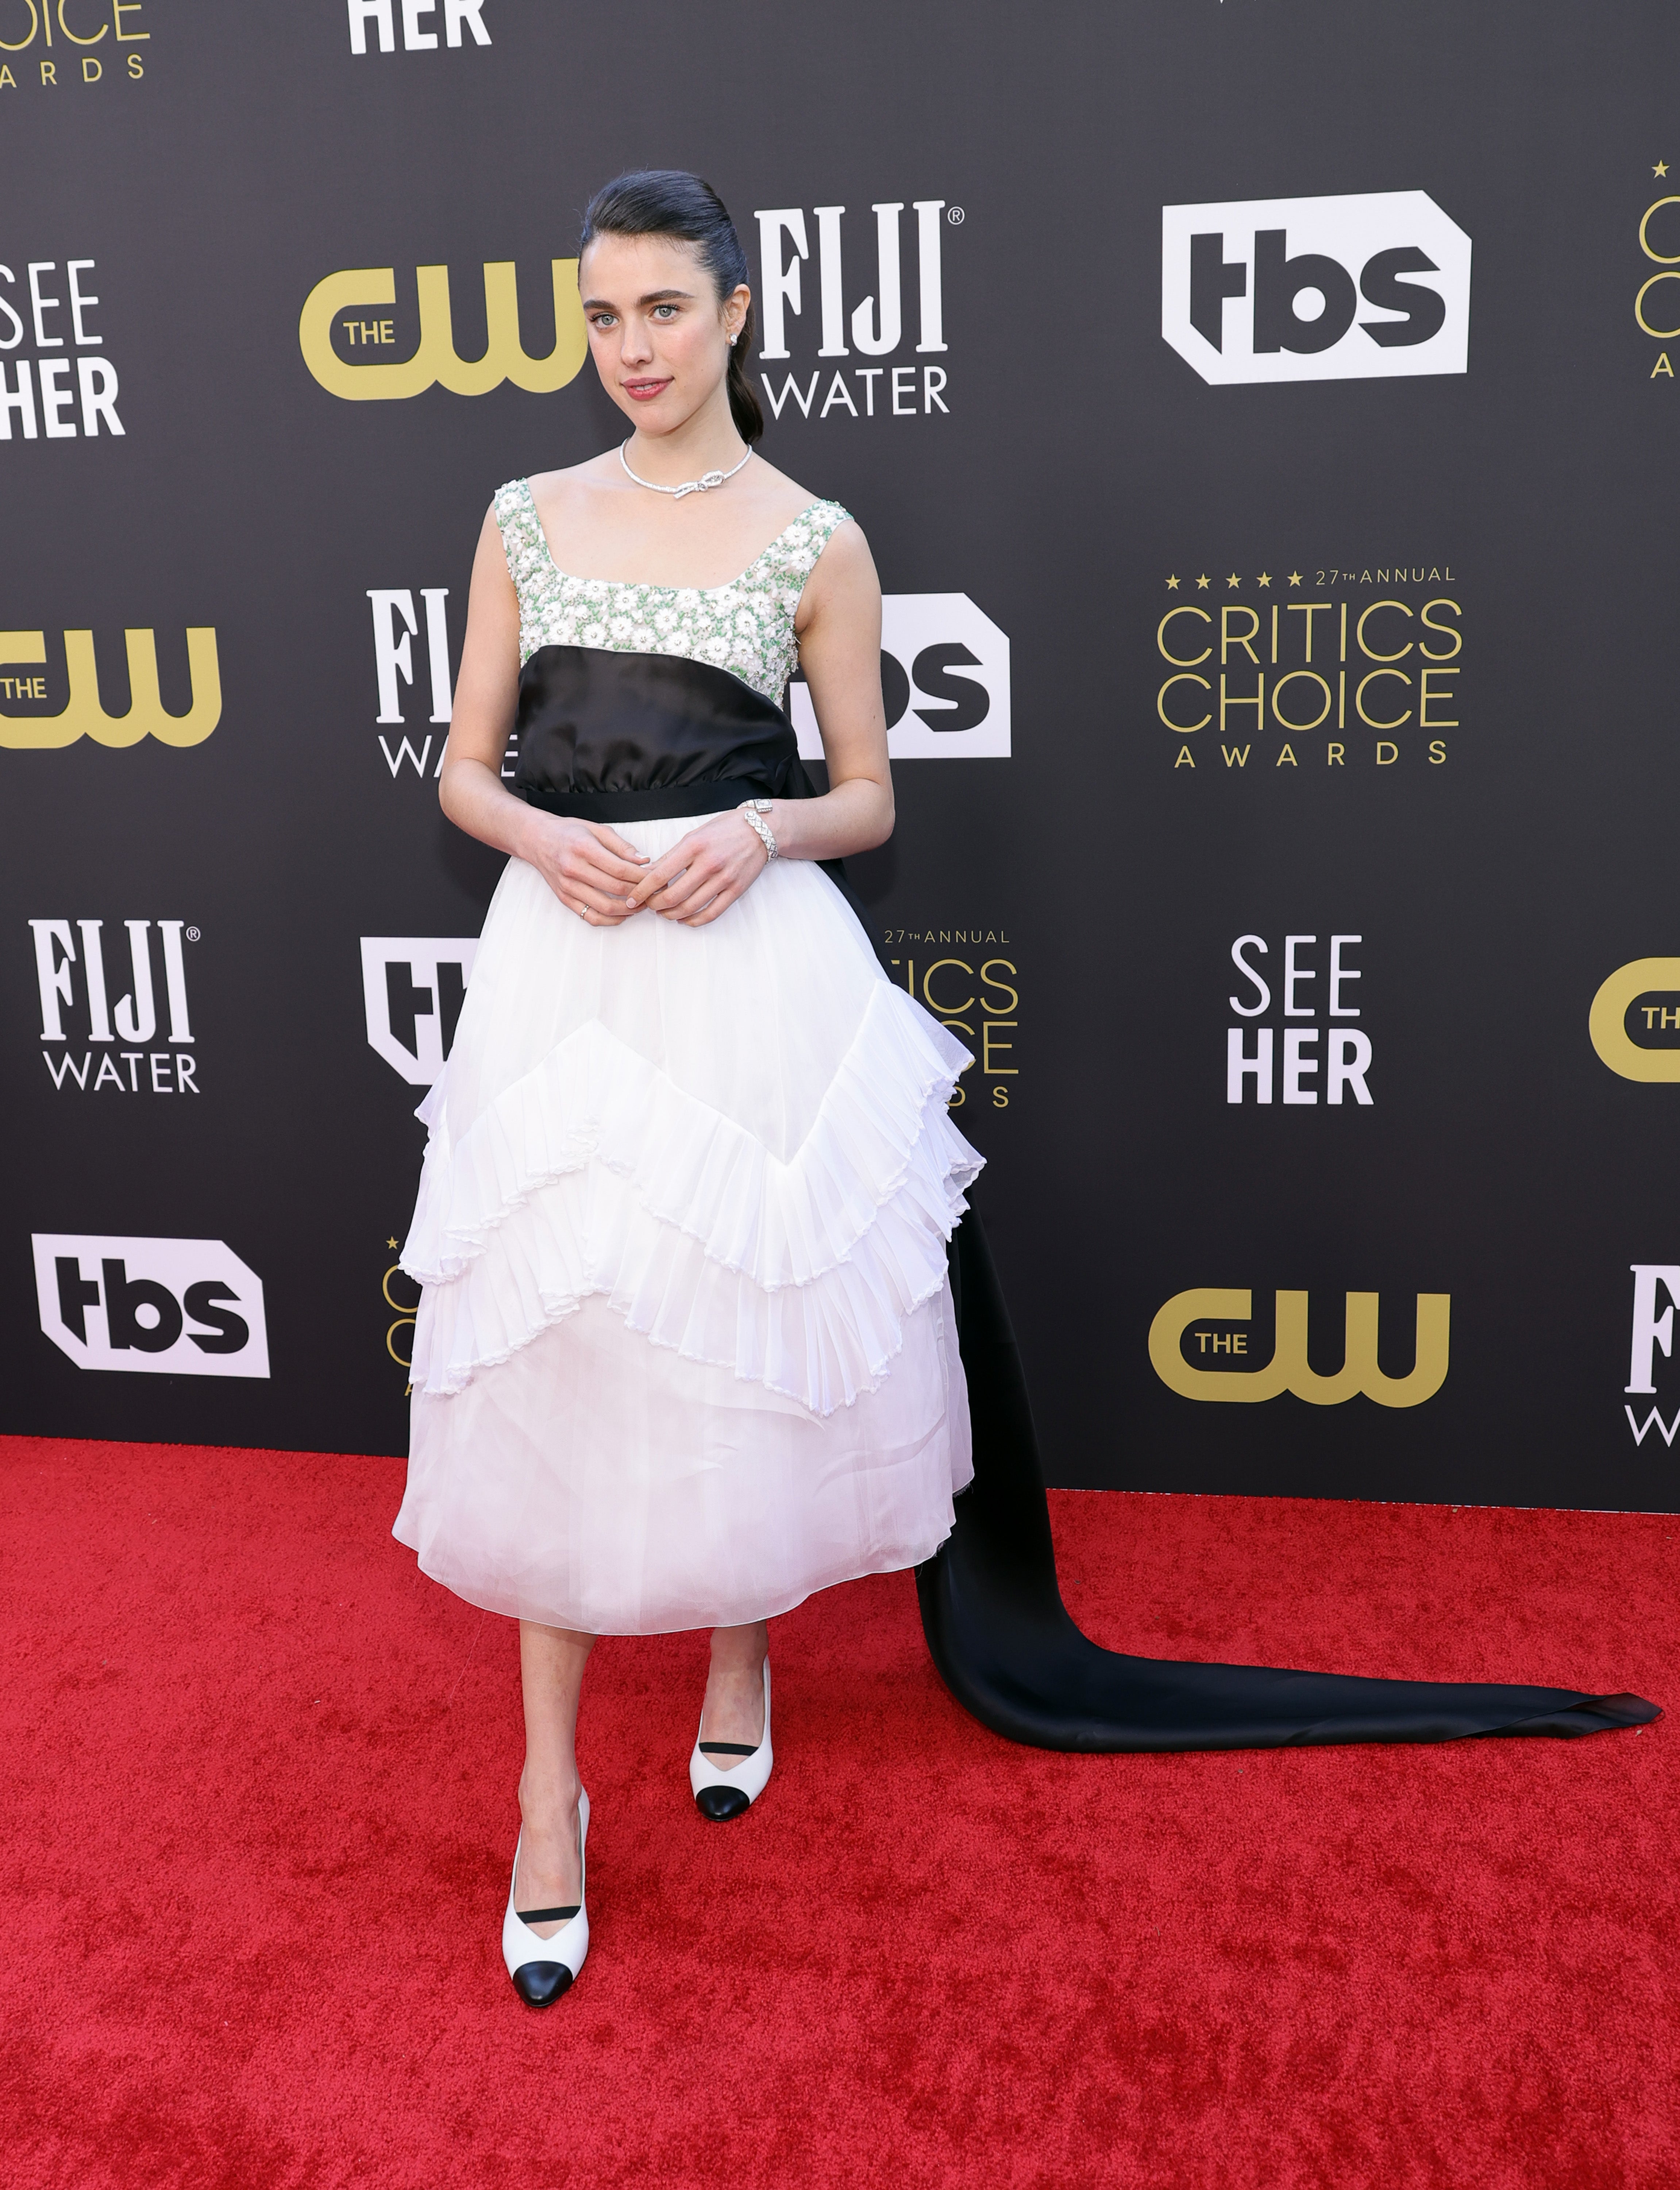 Margaret Qualley wore a Chanel frock